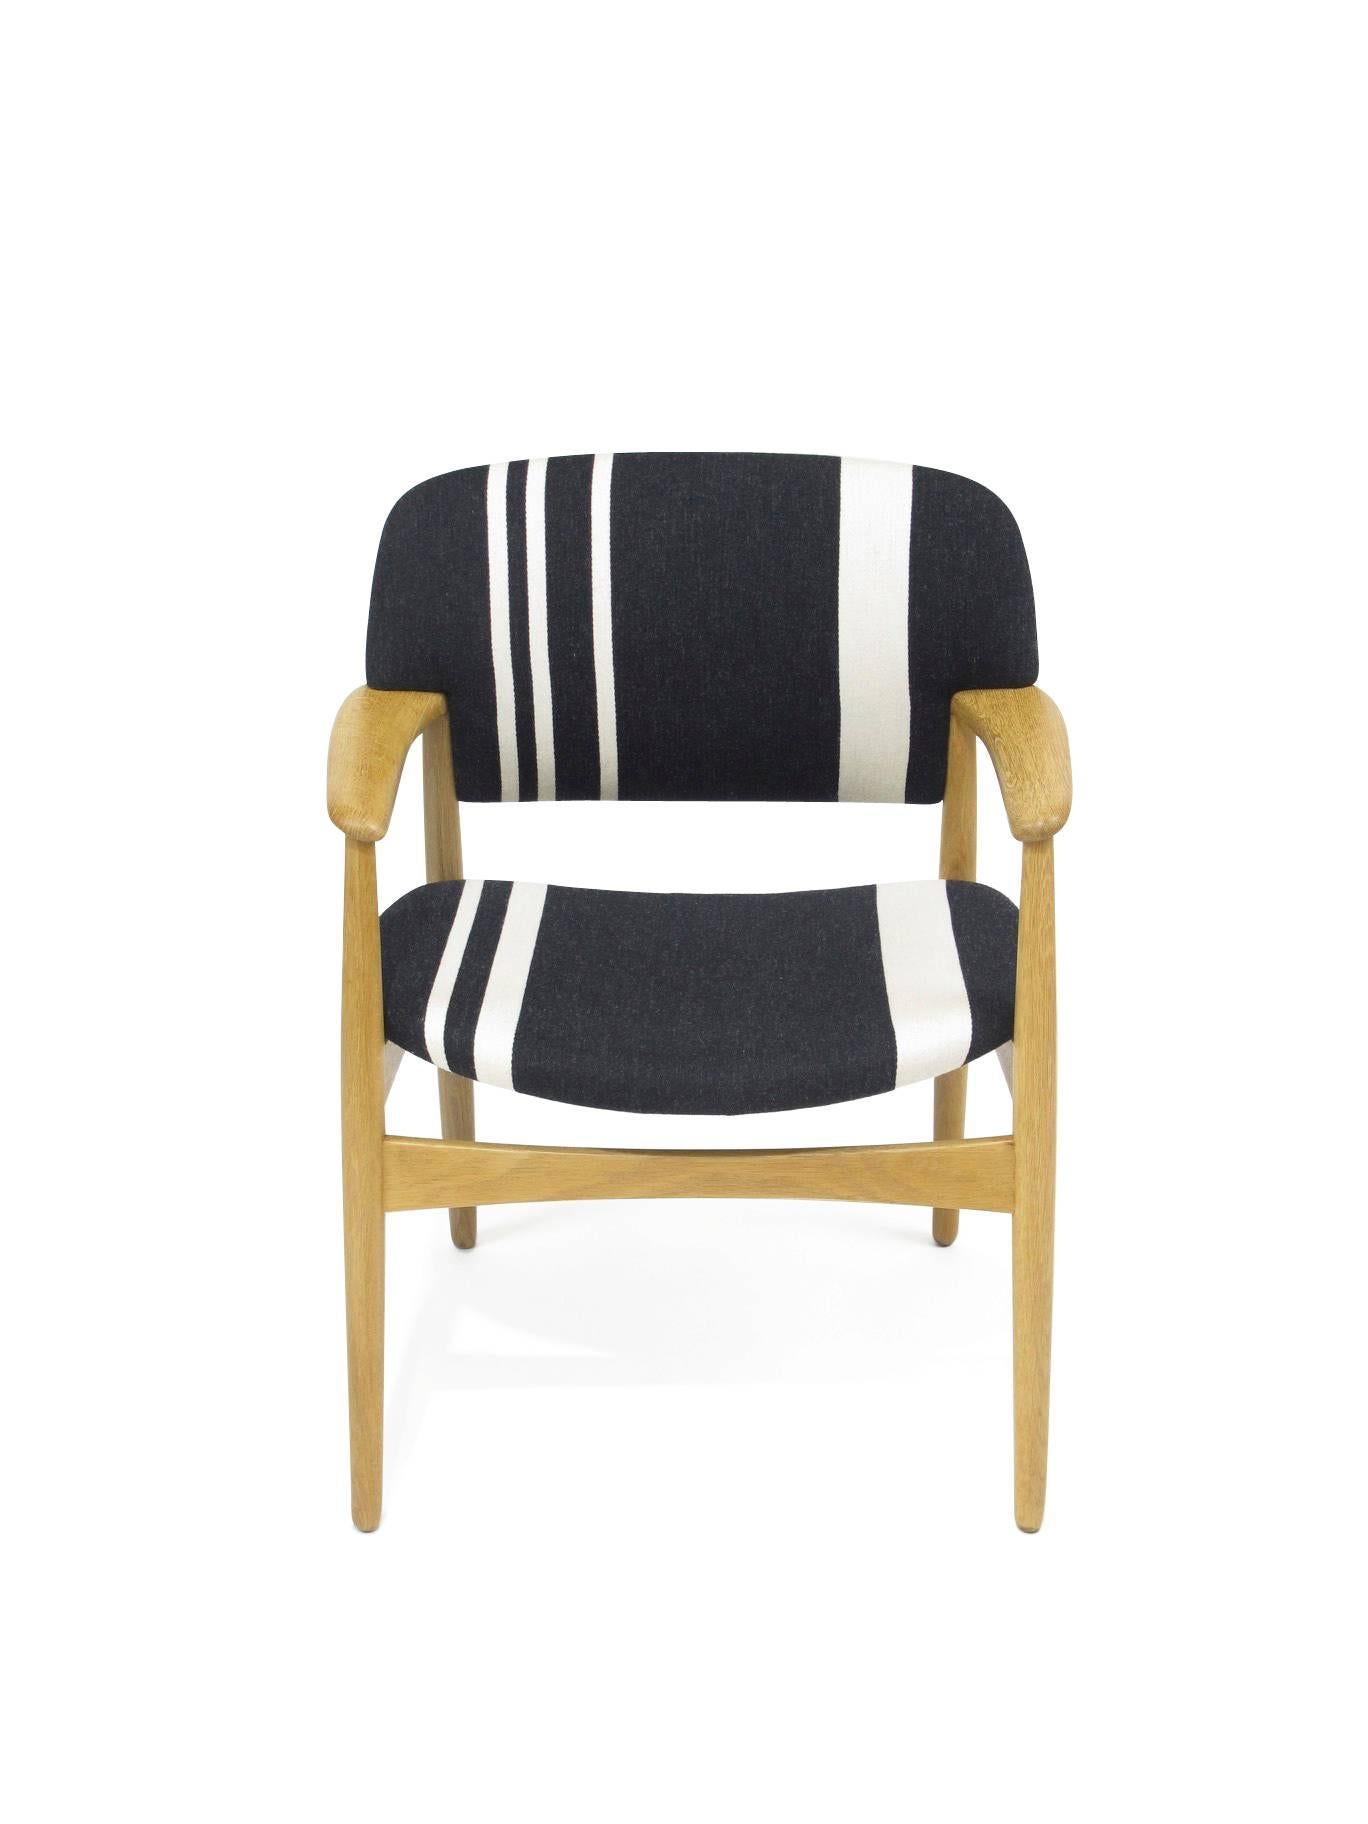 Aksel Bender Madsen for Fritz Hansen arm chairs with white oak frames. Newly restored and upholstered in designer wool fabric in bold graphic pattern.